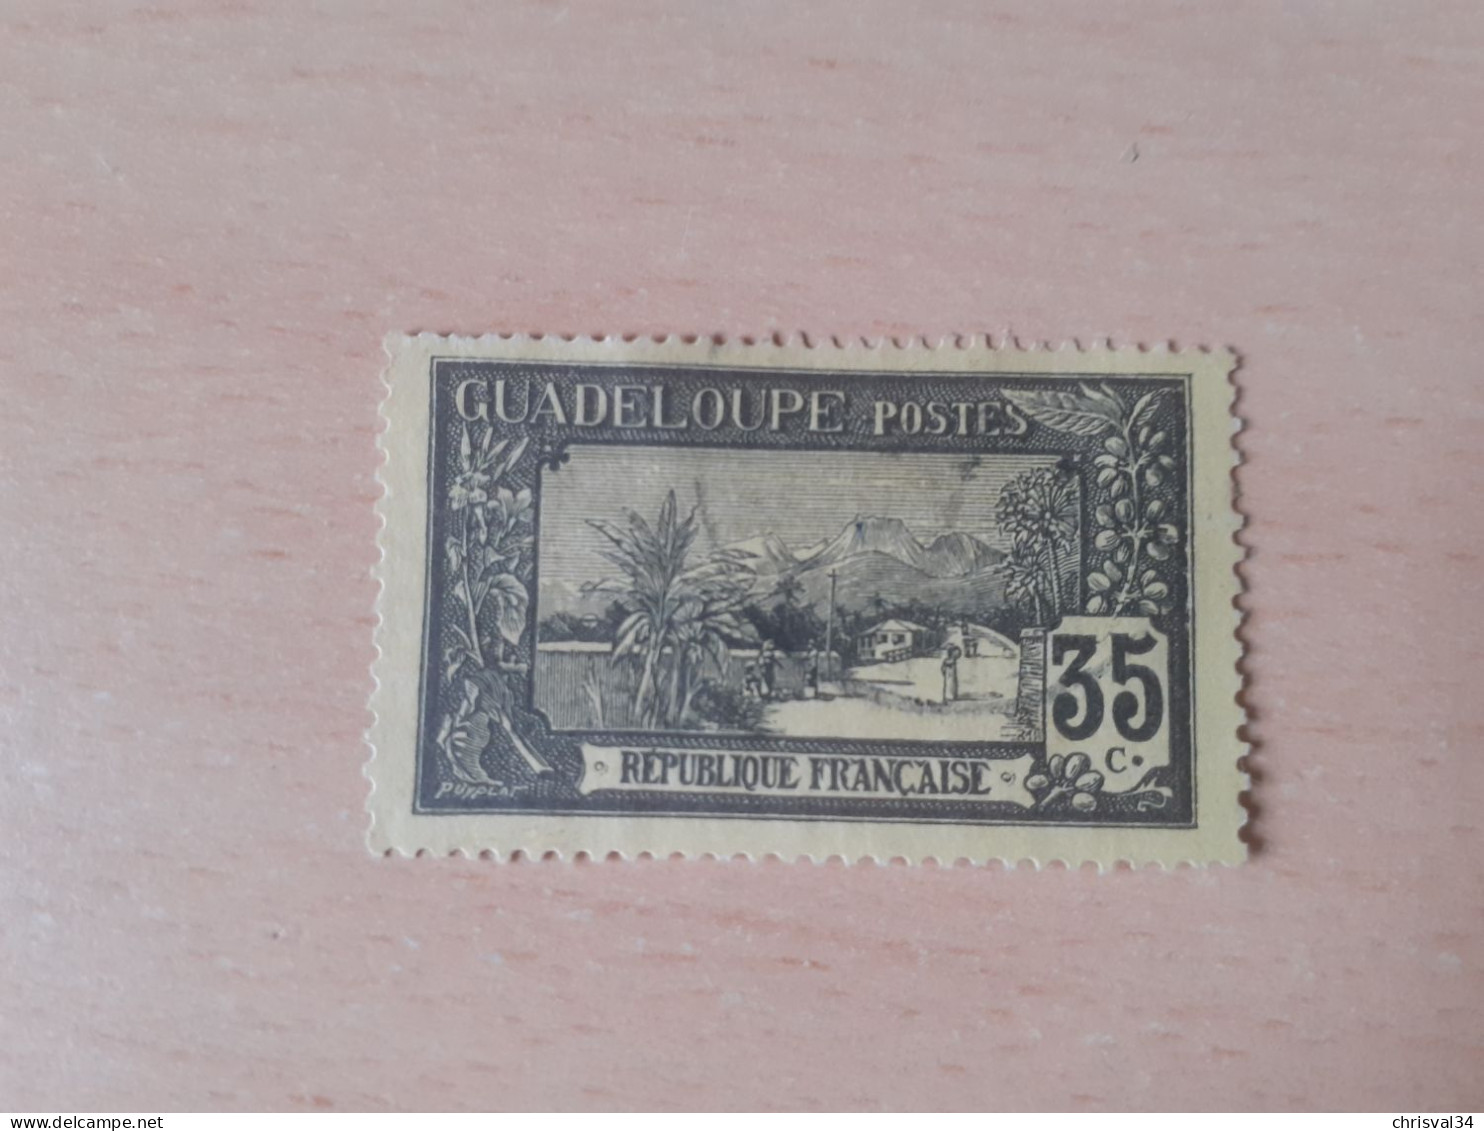 TIMBRE   GUADELOUPE       N  64     COTE  1,00   EUROS  NEUF  SG - Unused Stamps